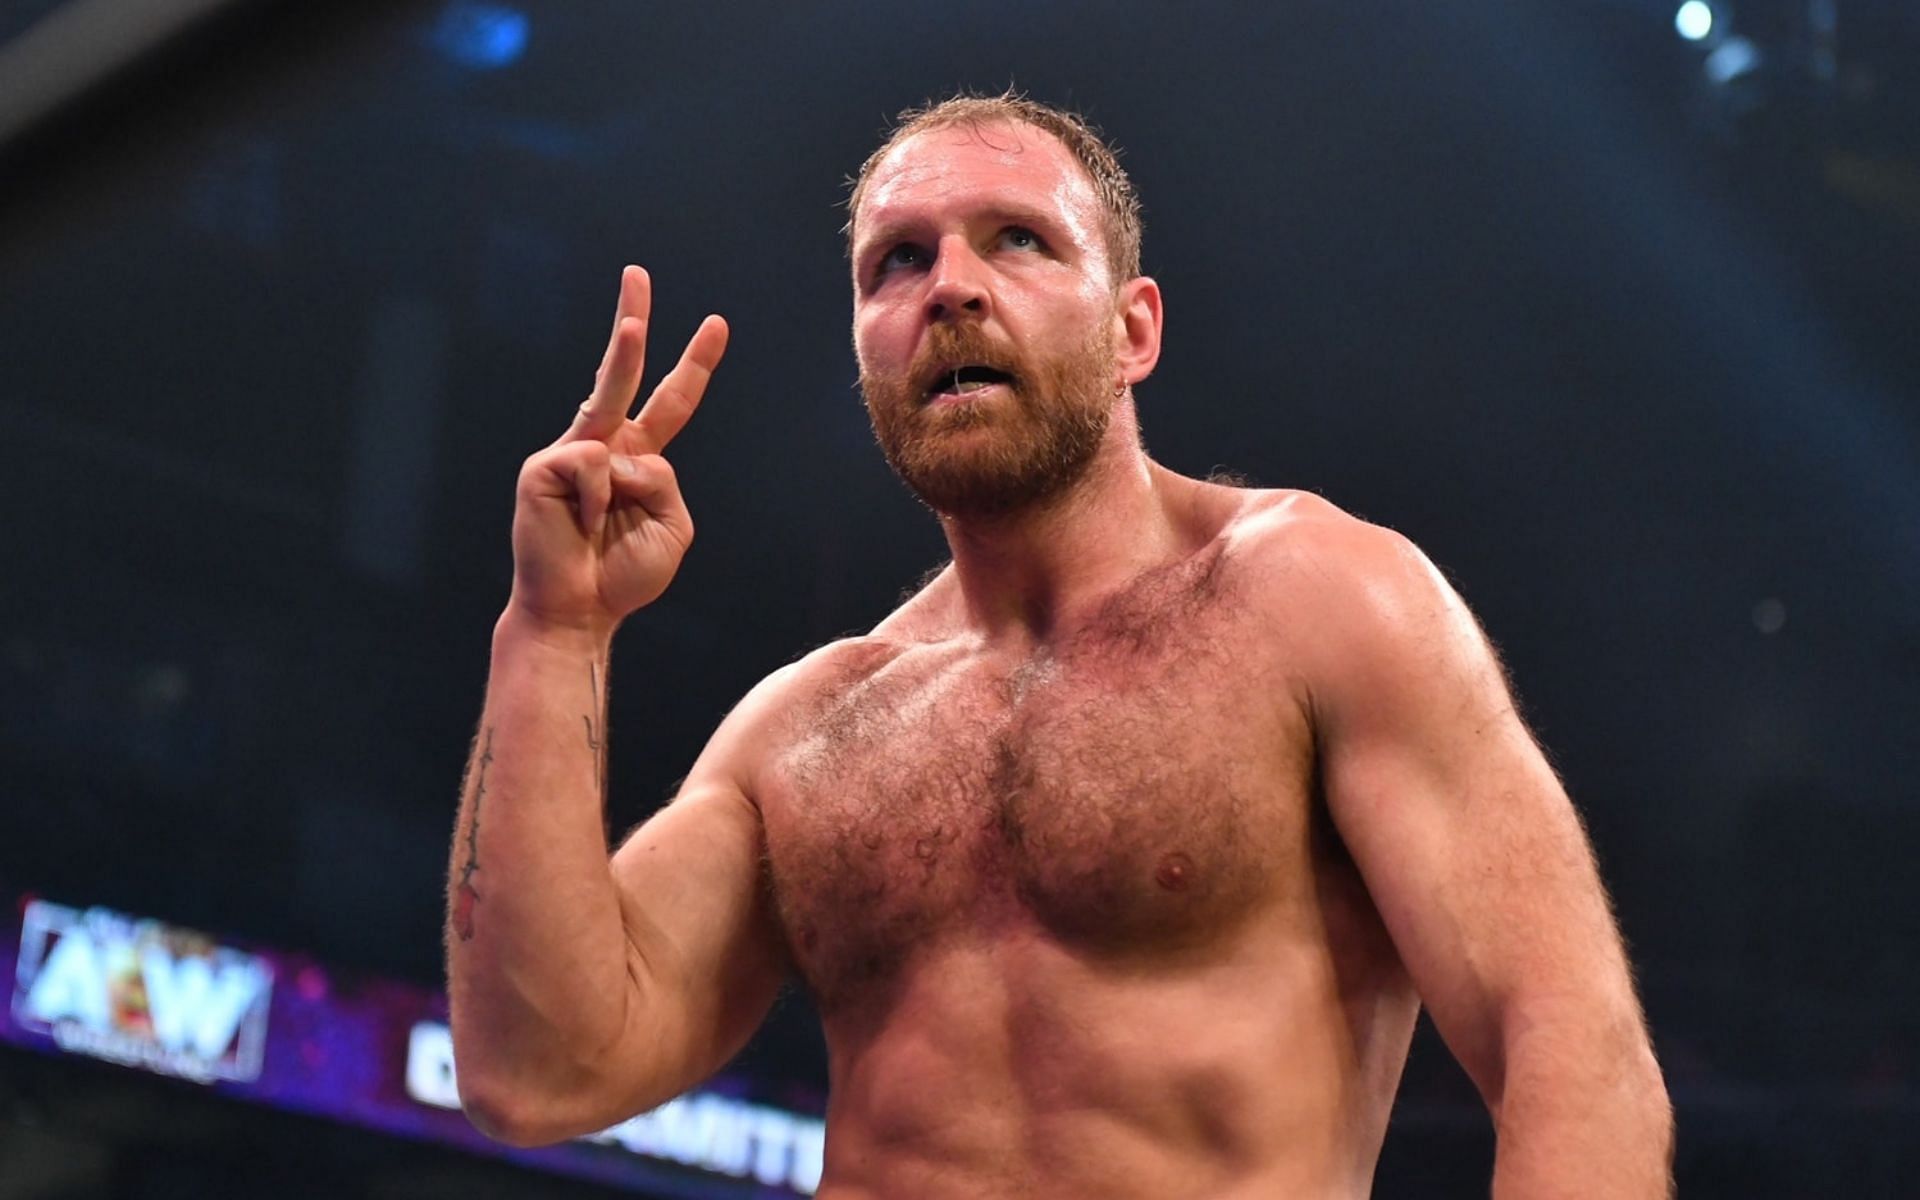 Jon Moxley lost the AEW World Championship last night at All Out.